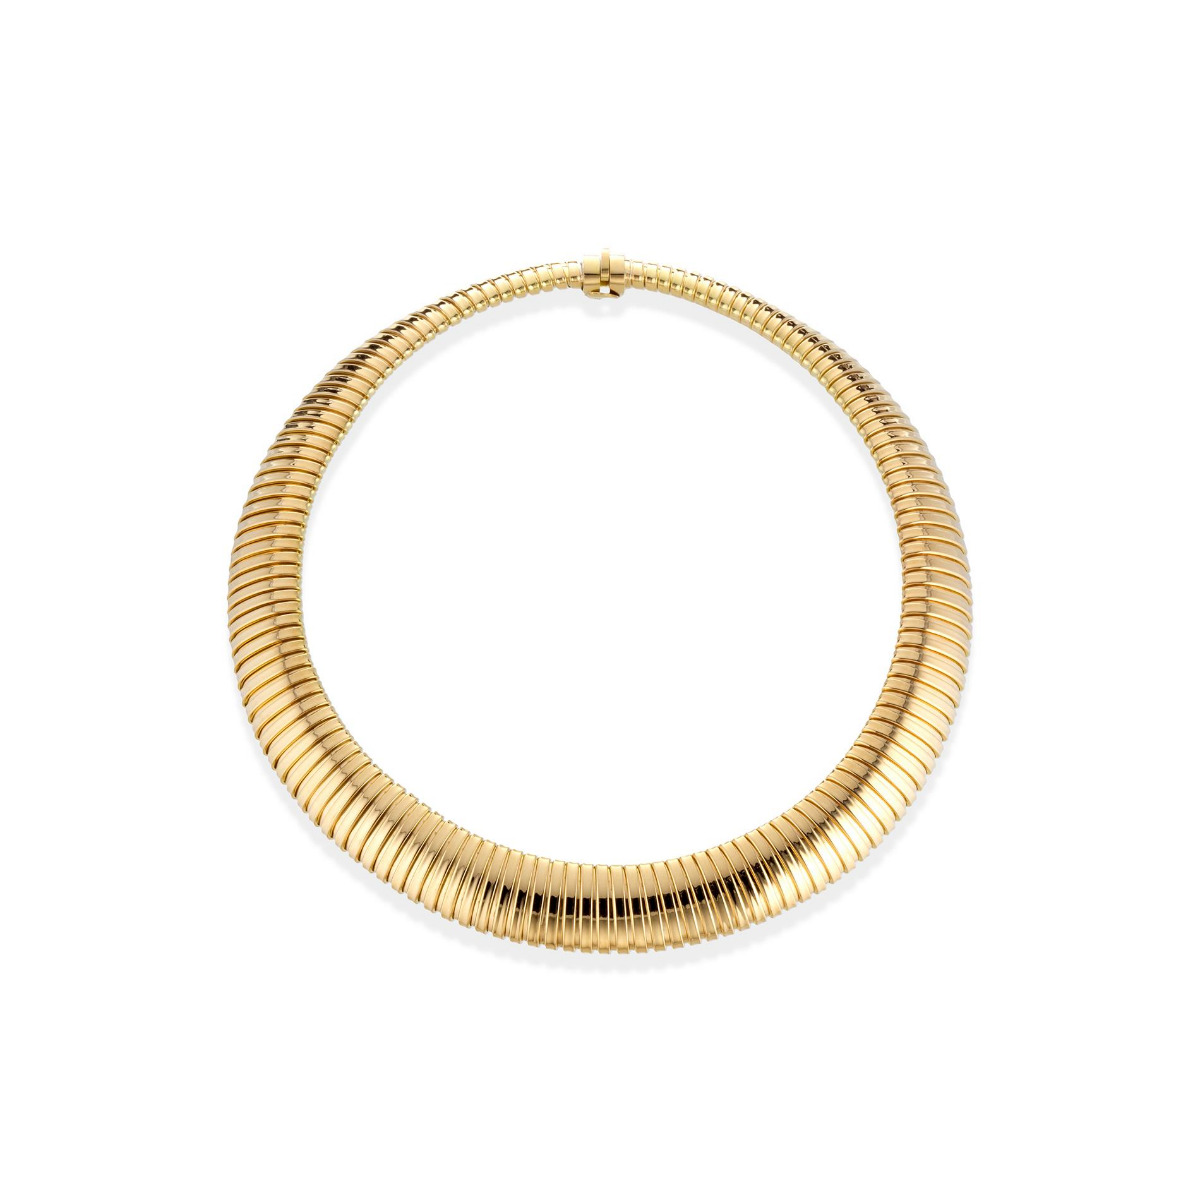 London Collection 18k Tubogas Necklace